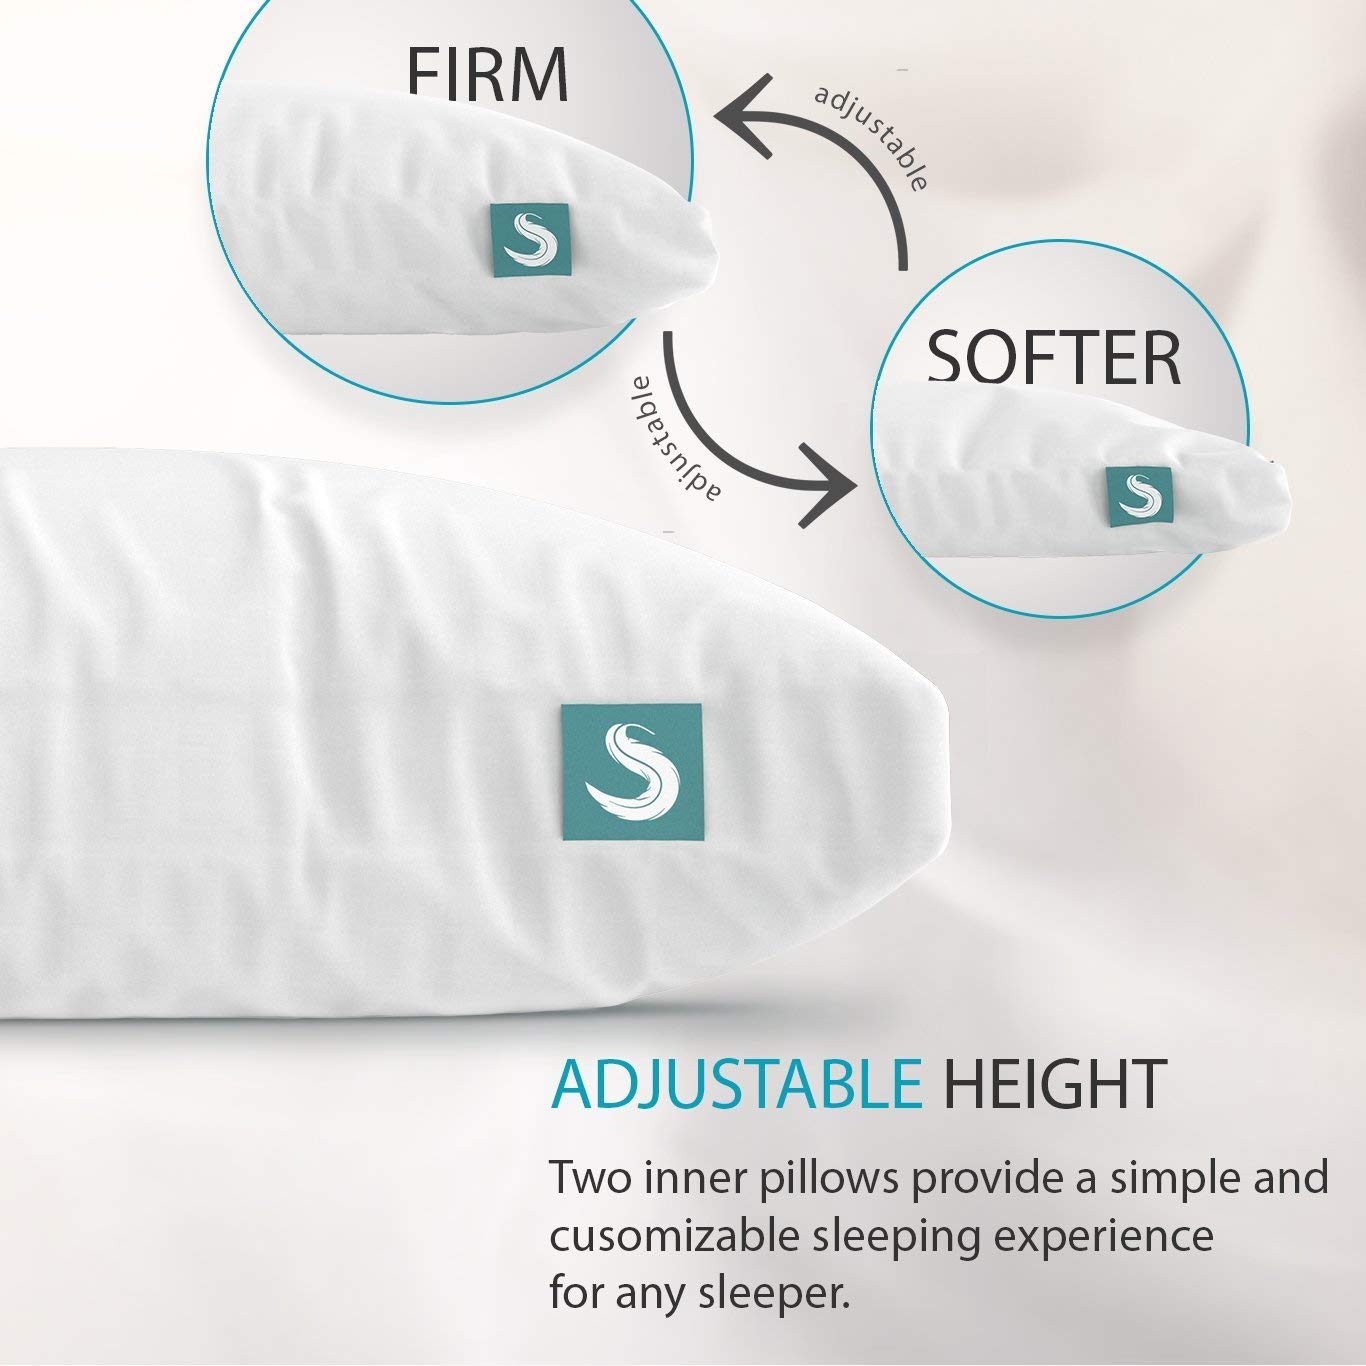 Sleepgram Pillow Review: Construction, Firmness, Points to Consider